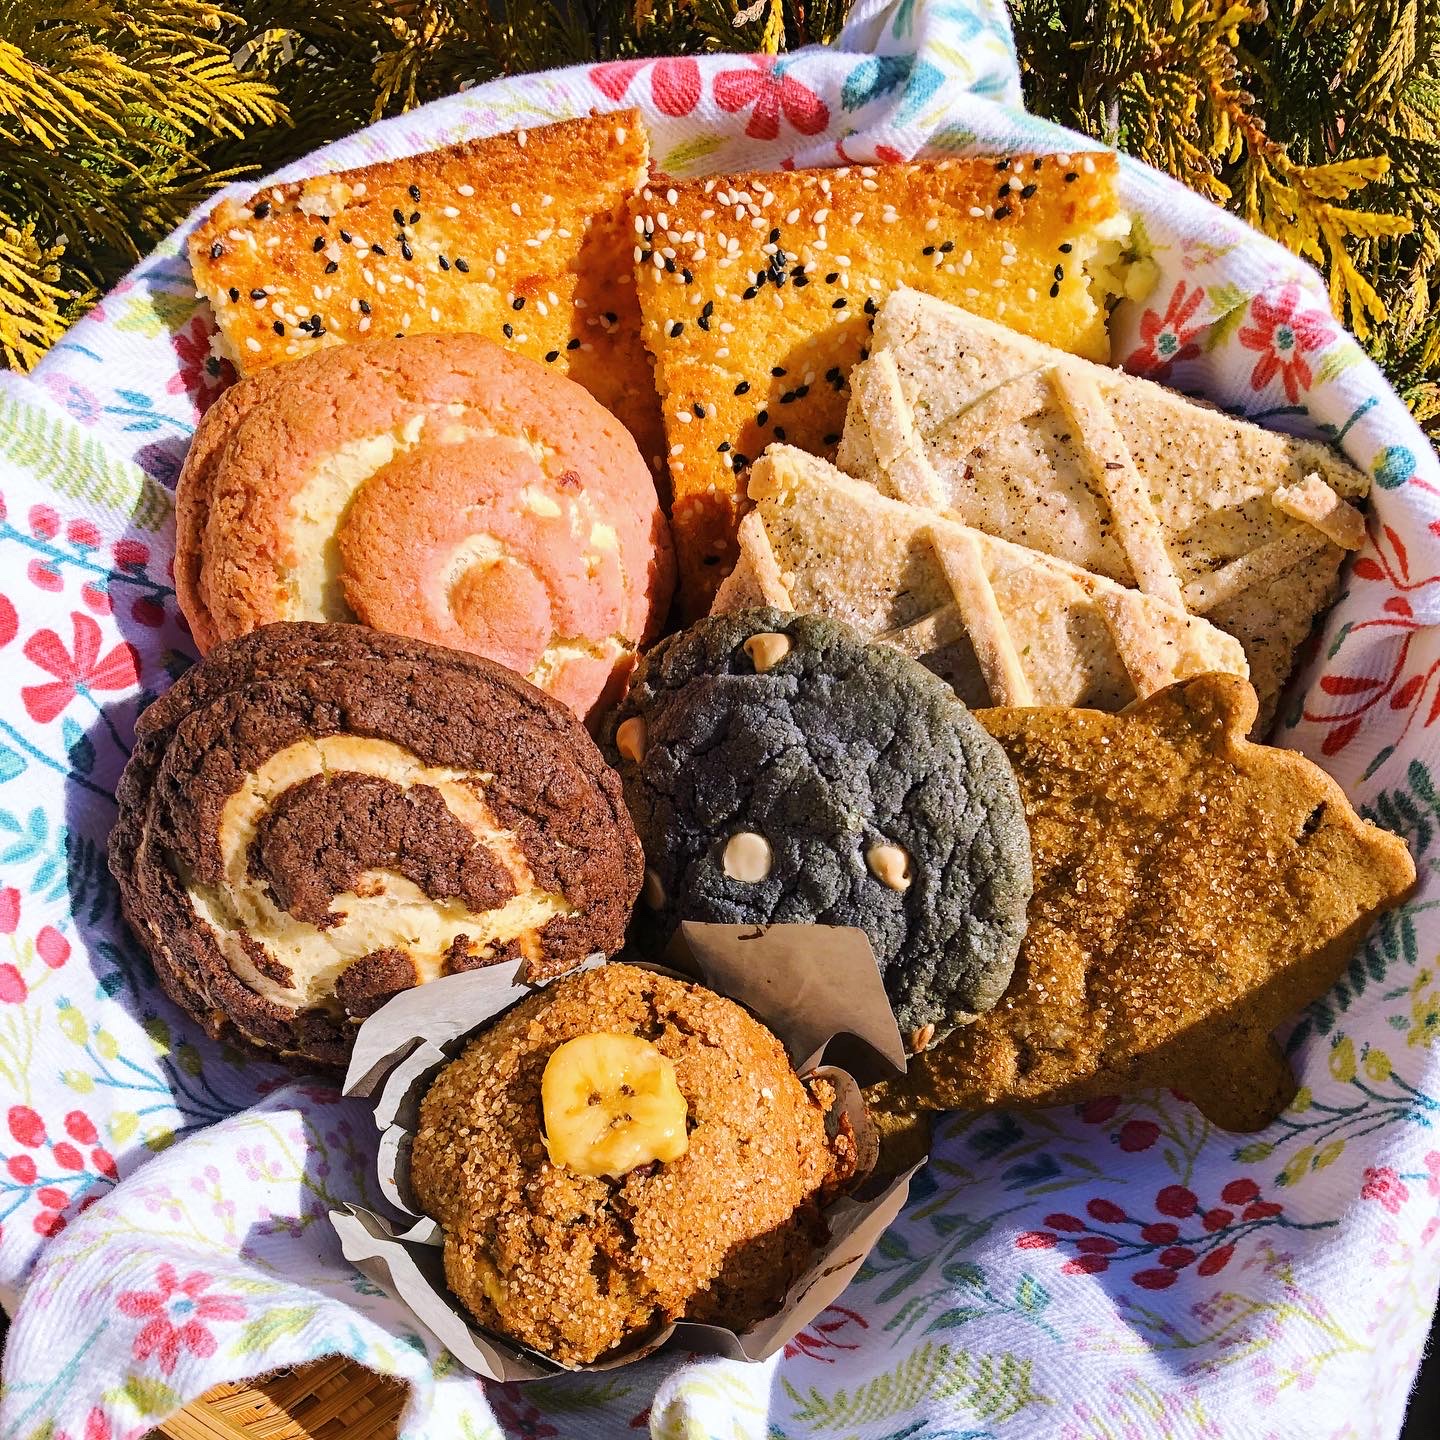 A basket of pan dulce nestled in the grass. A white tea towel beneath the pastries with a pink flower pattern. In the back, two golden square pastries with black and white sesame seeds scattered across the surface. Two other rectangular-shaped pastry has a criss-cross texture. A chocolate cookie in the center, surrounded by round, swirled pan dulce dusted with cinnamon. In the foreground is a pan dulce with a single banana slice baked into the center. Warm light illuminates the basket.